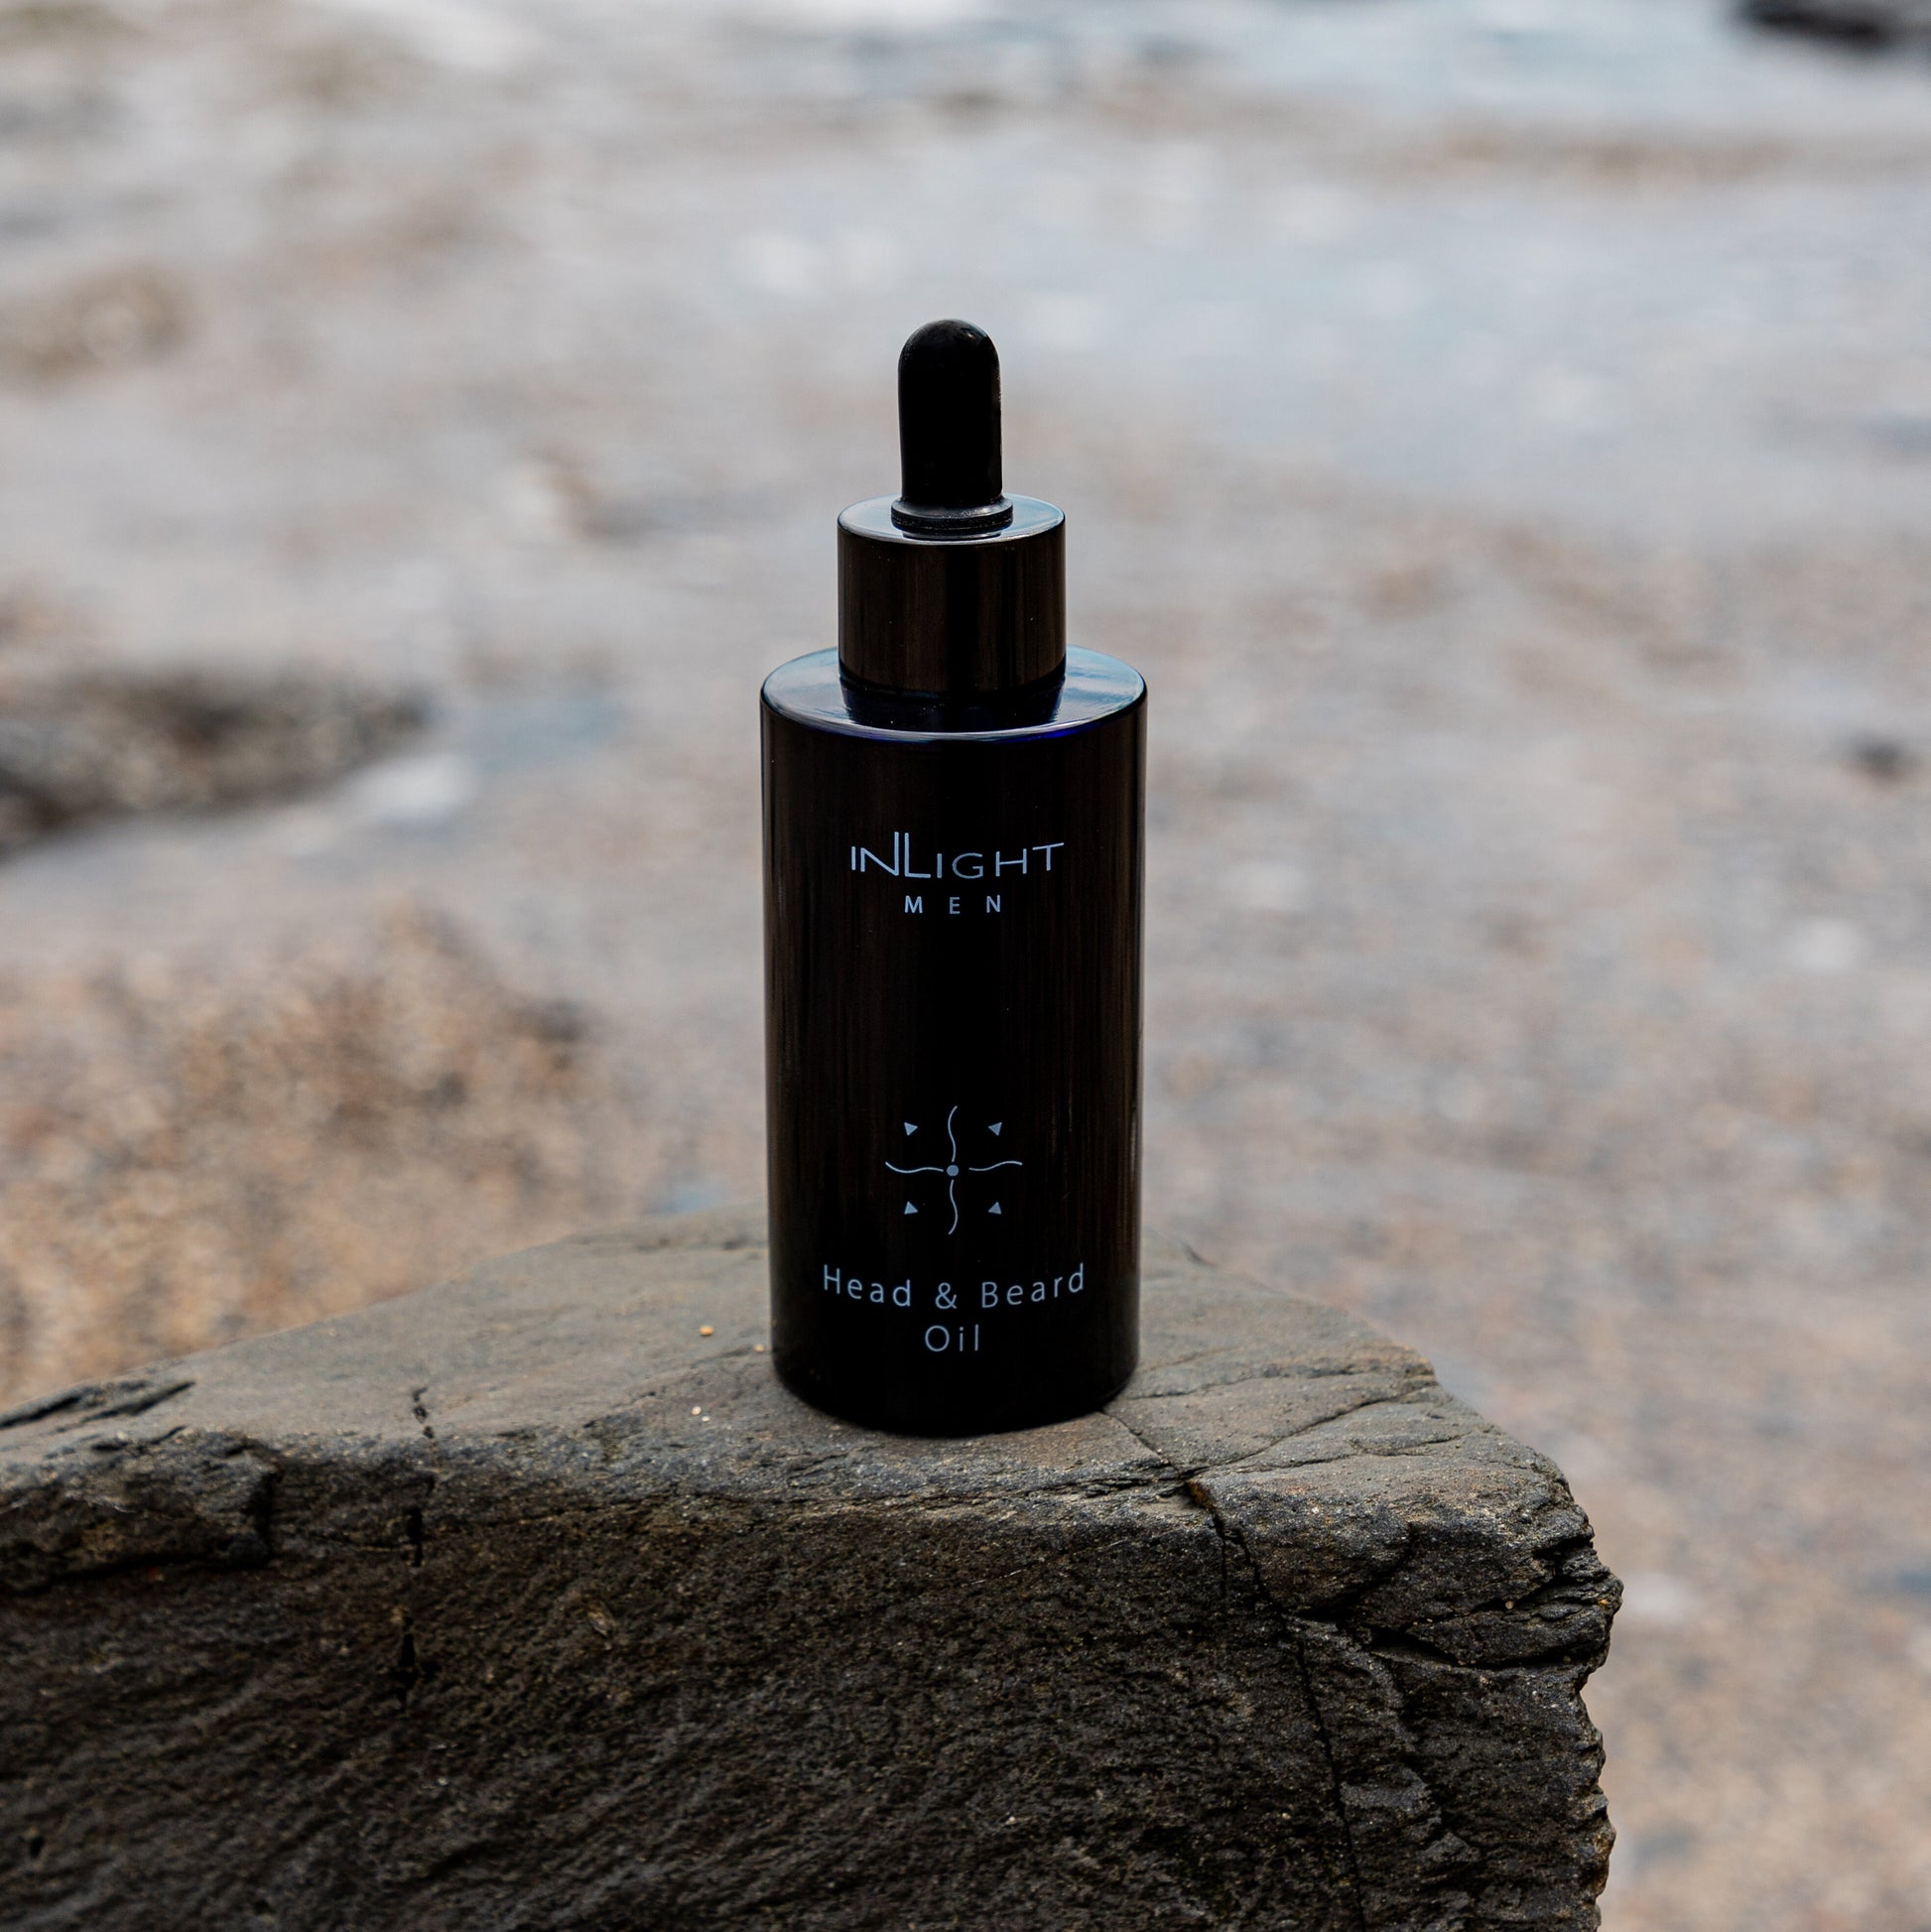 inlight beauty 100% organic head and beard oil in a black recycled miron glass bottle with pipette sitting on a grey rock with a blurred beach setting in the background where you can see pebbles and placid water